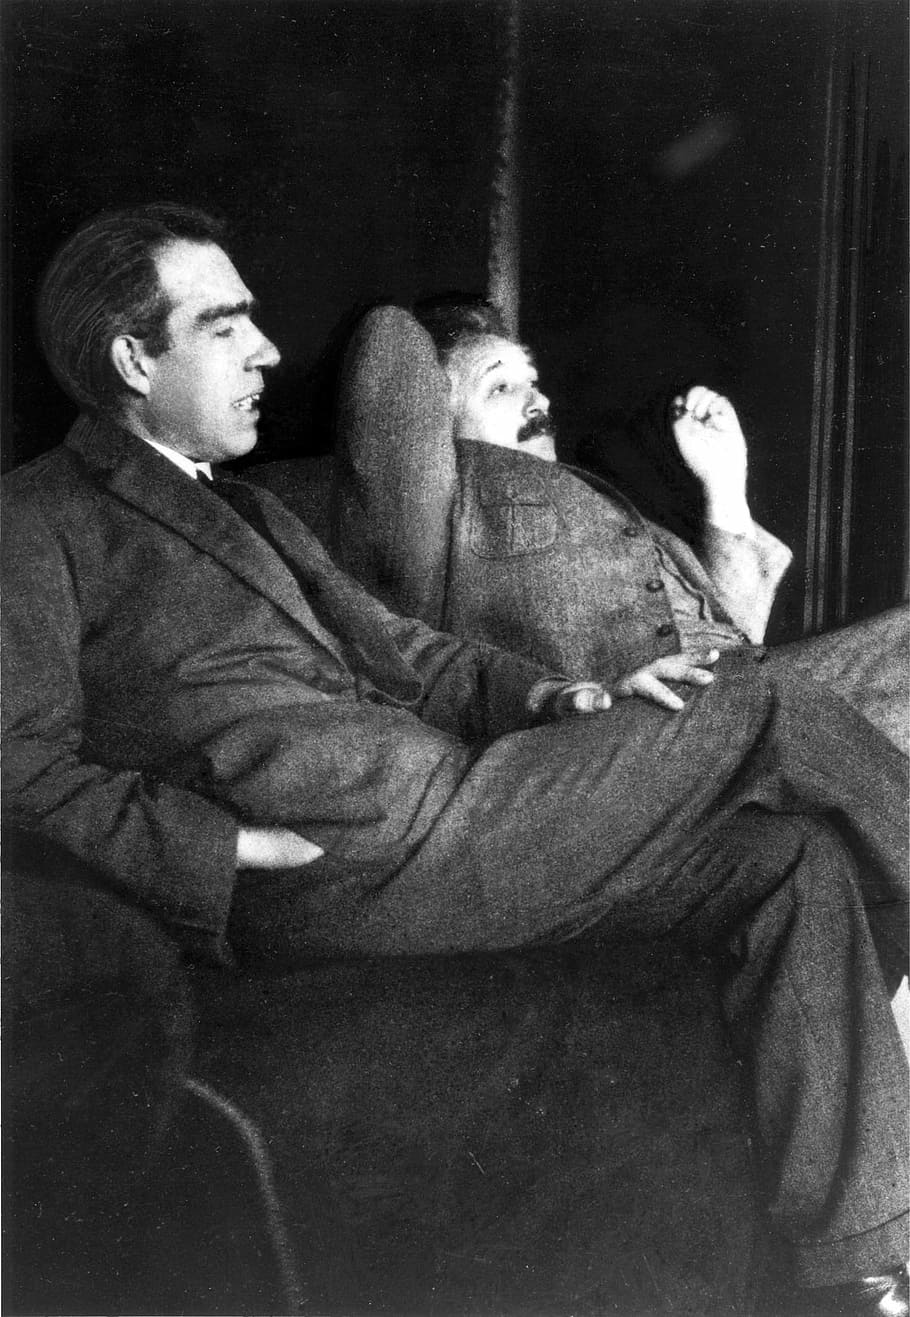 HD wallpaper Albert Einstein And Niels Bohr 1925 casual discussion  personalities of the twentieth century  Wallpaper Flare